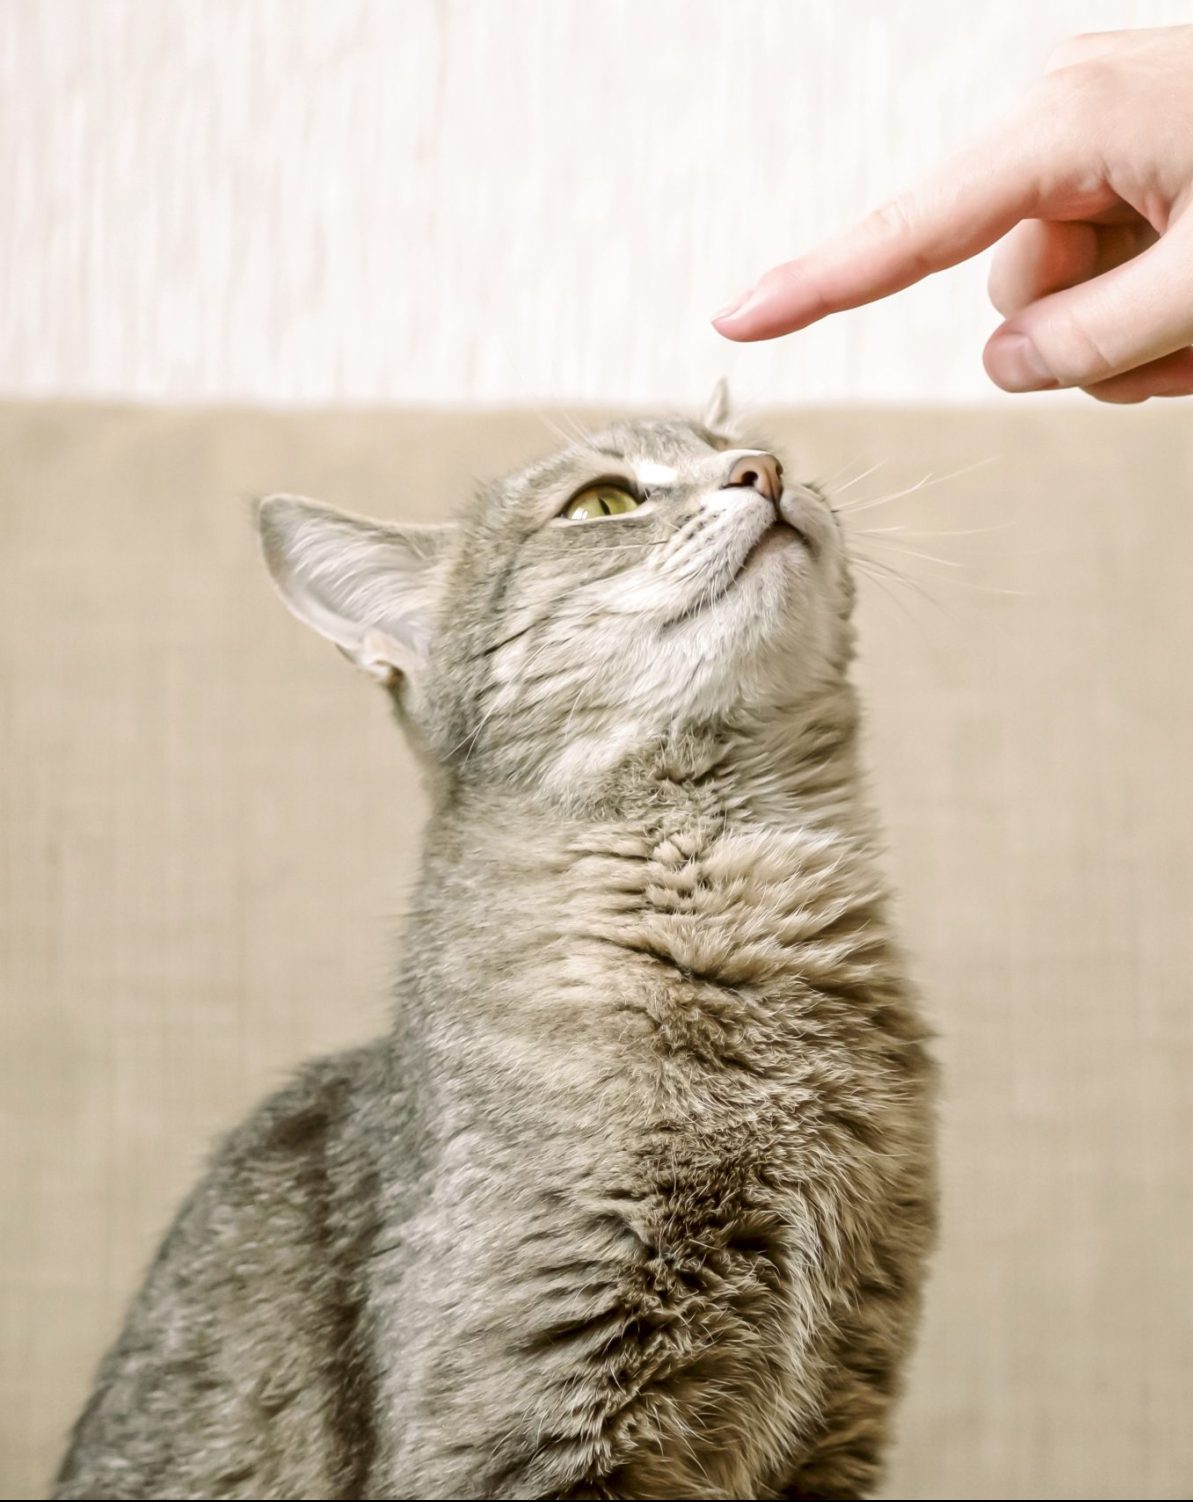 Train a Cat - A gray striped cat sits on a beige sofa and sniffs a owner finger. The cat trusts the owner. Pet and human.